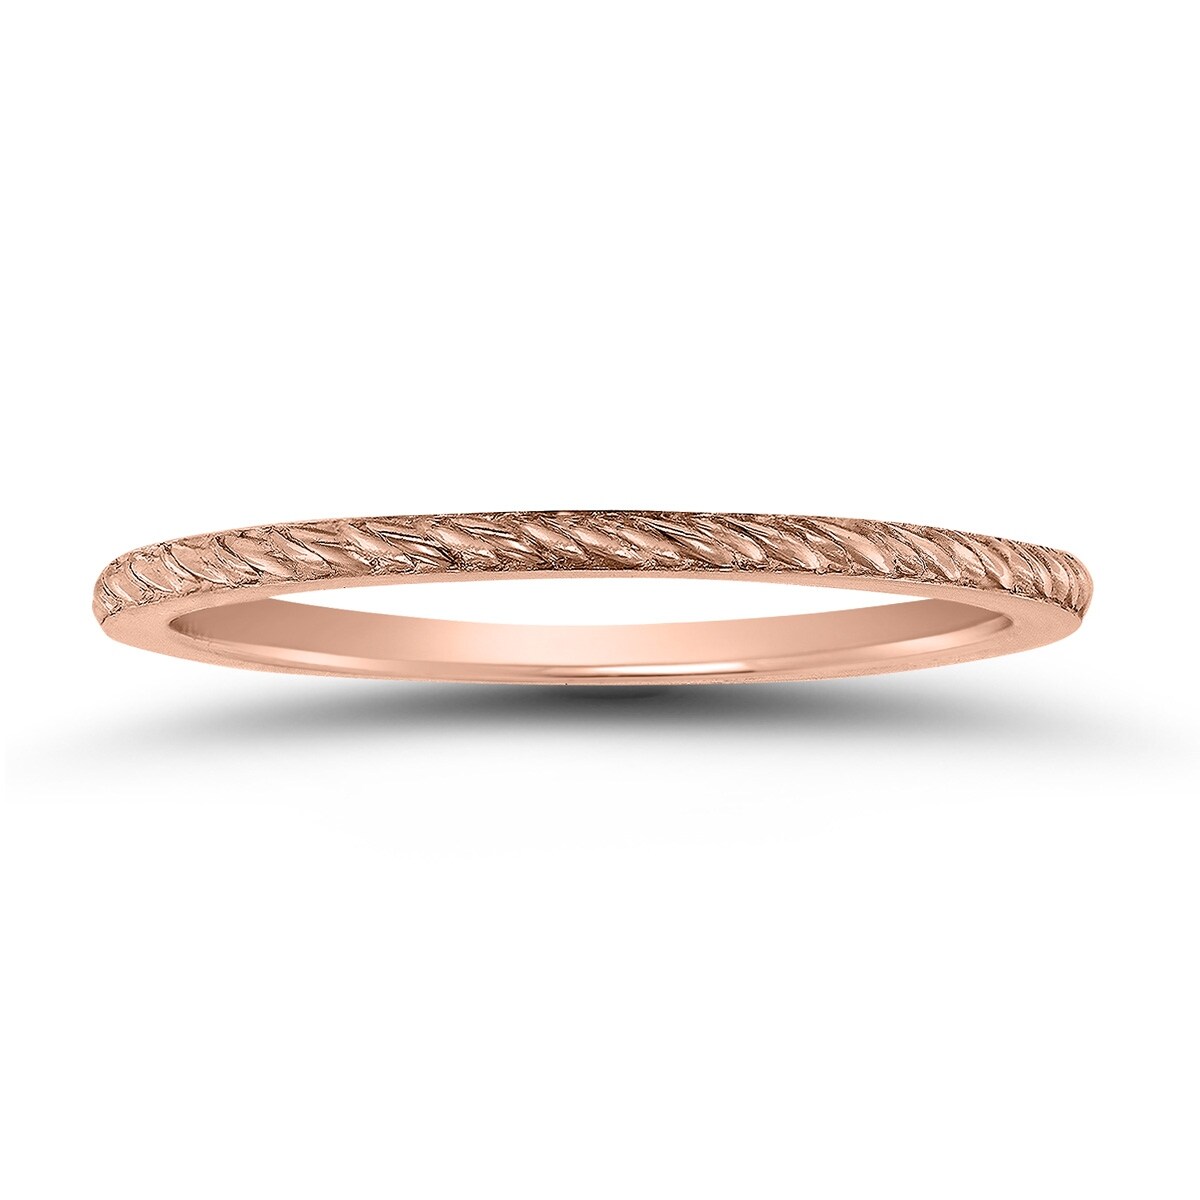 Jewels By Lux 14K Rose Gold Skinny Rope Wedding Ring Band Size 8.5